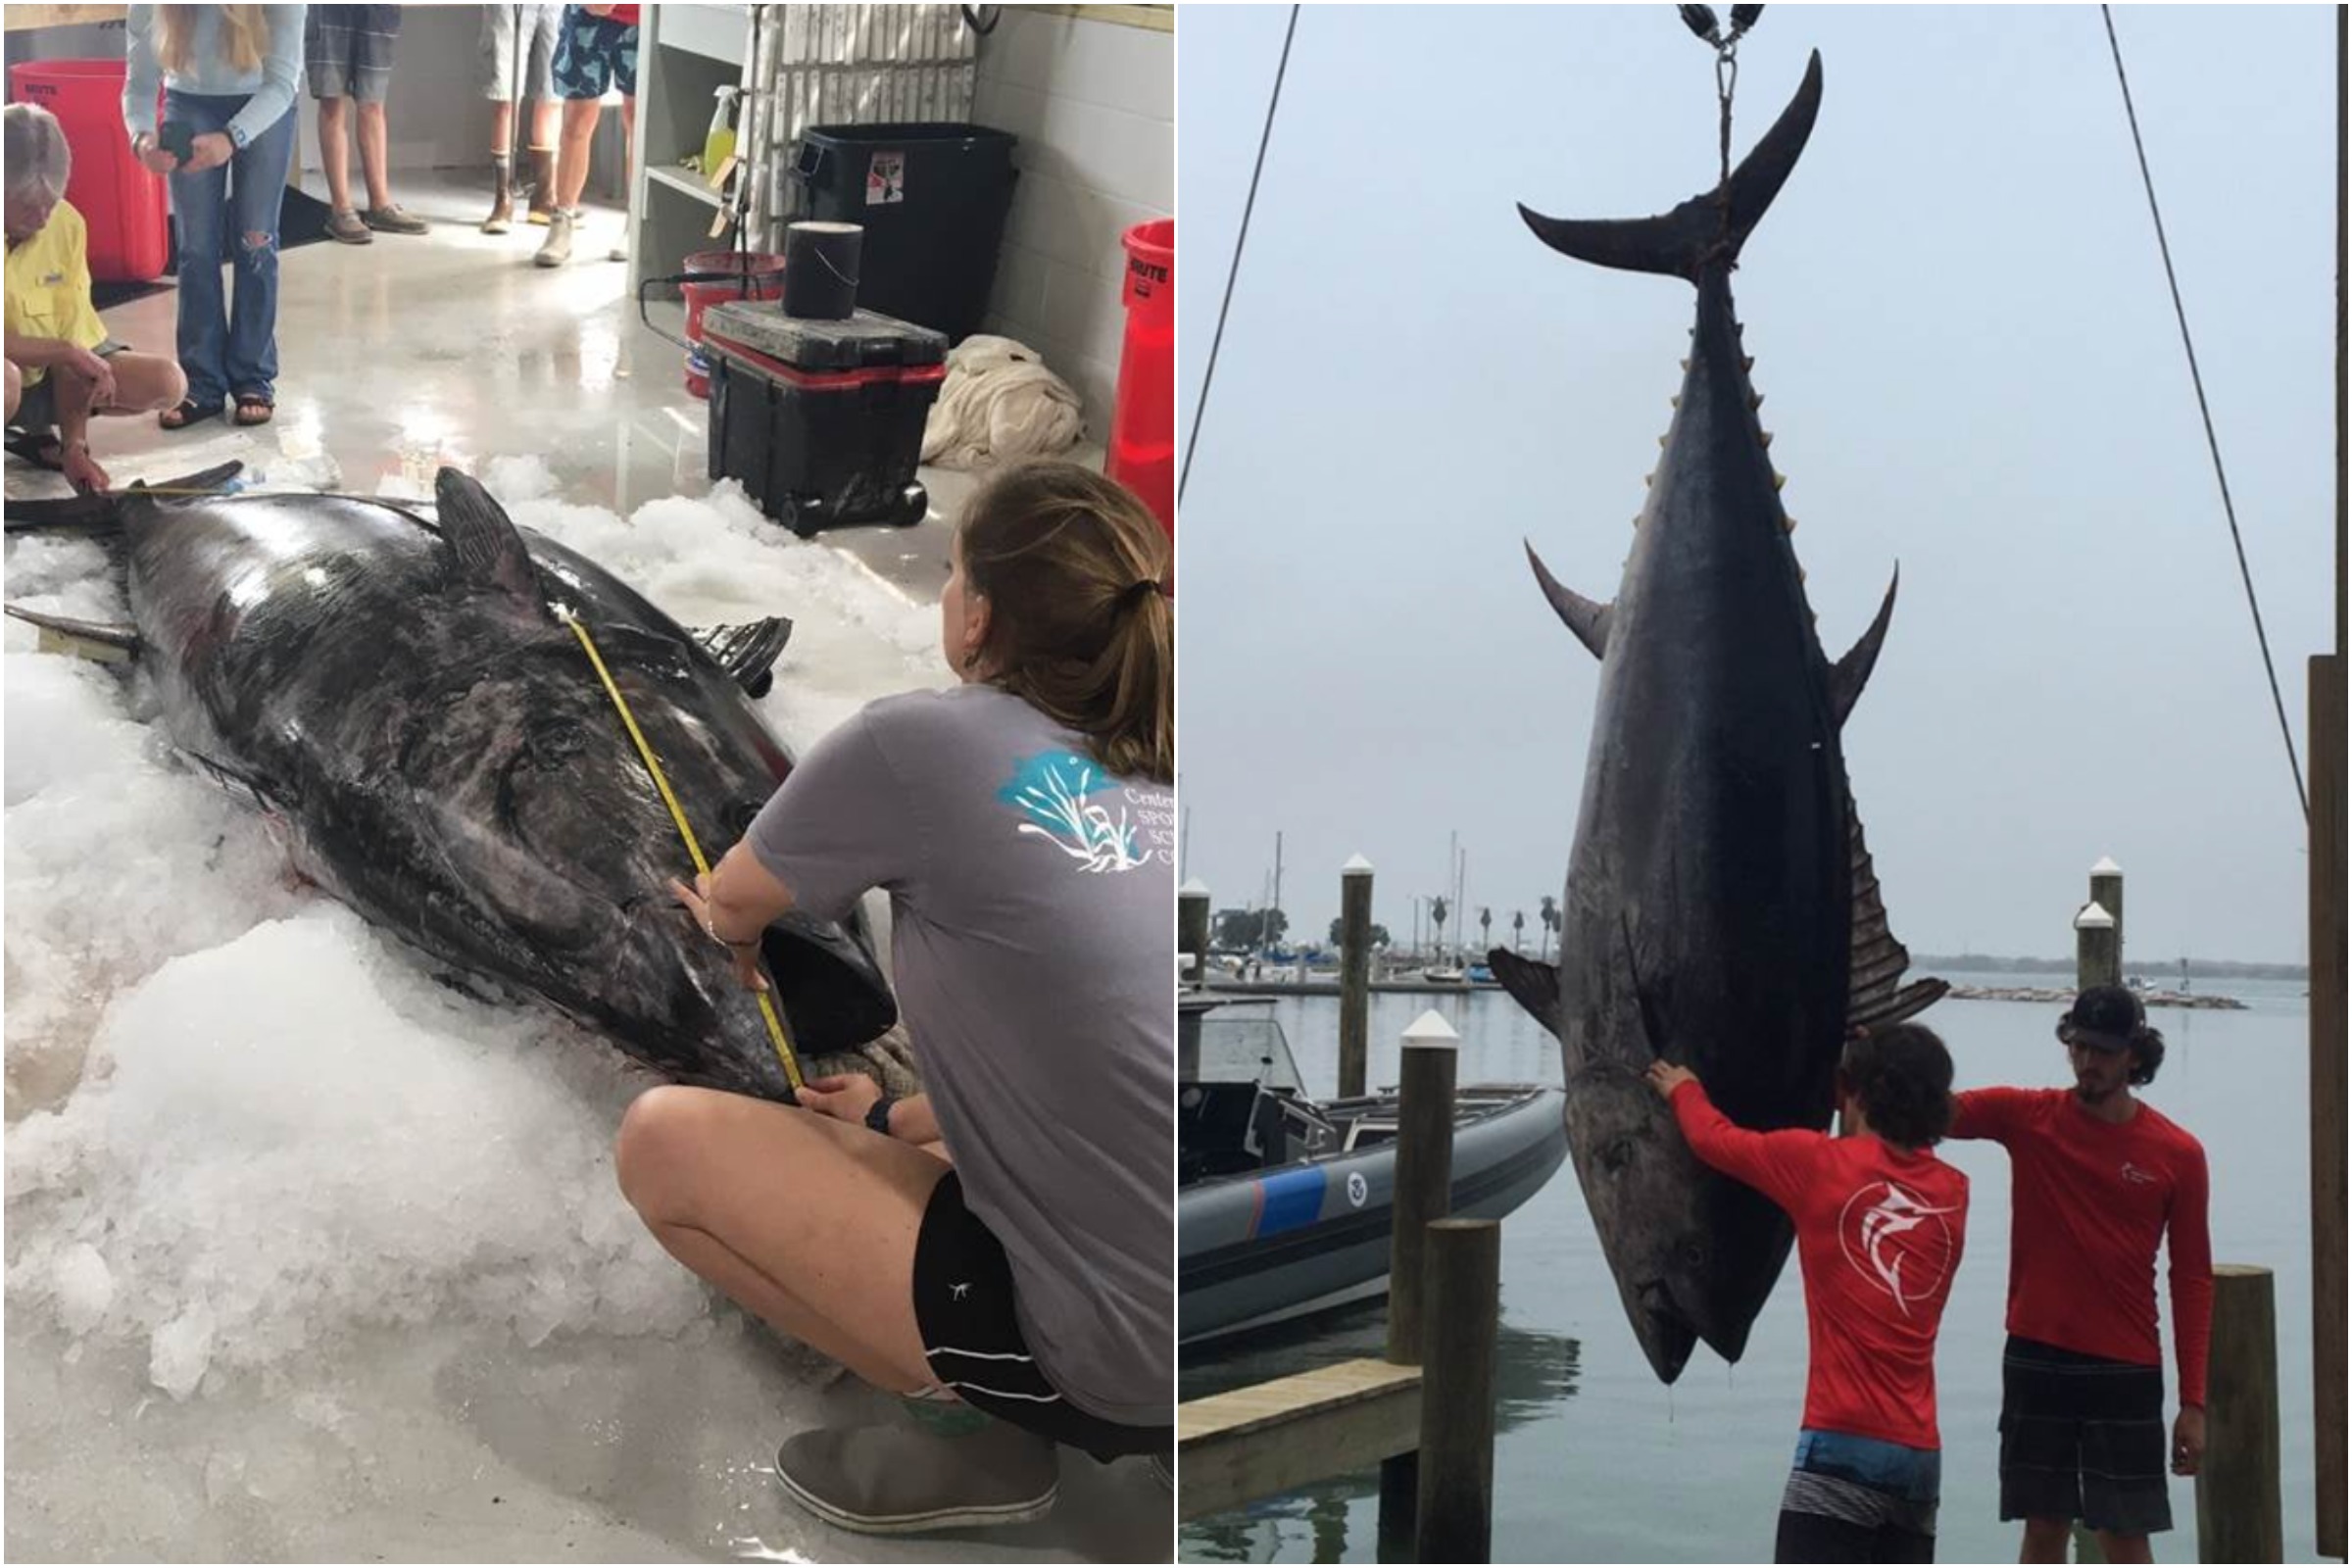 Angler Chronicles - Another Bluefin Tuna for Angler Chronicles